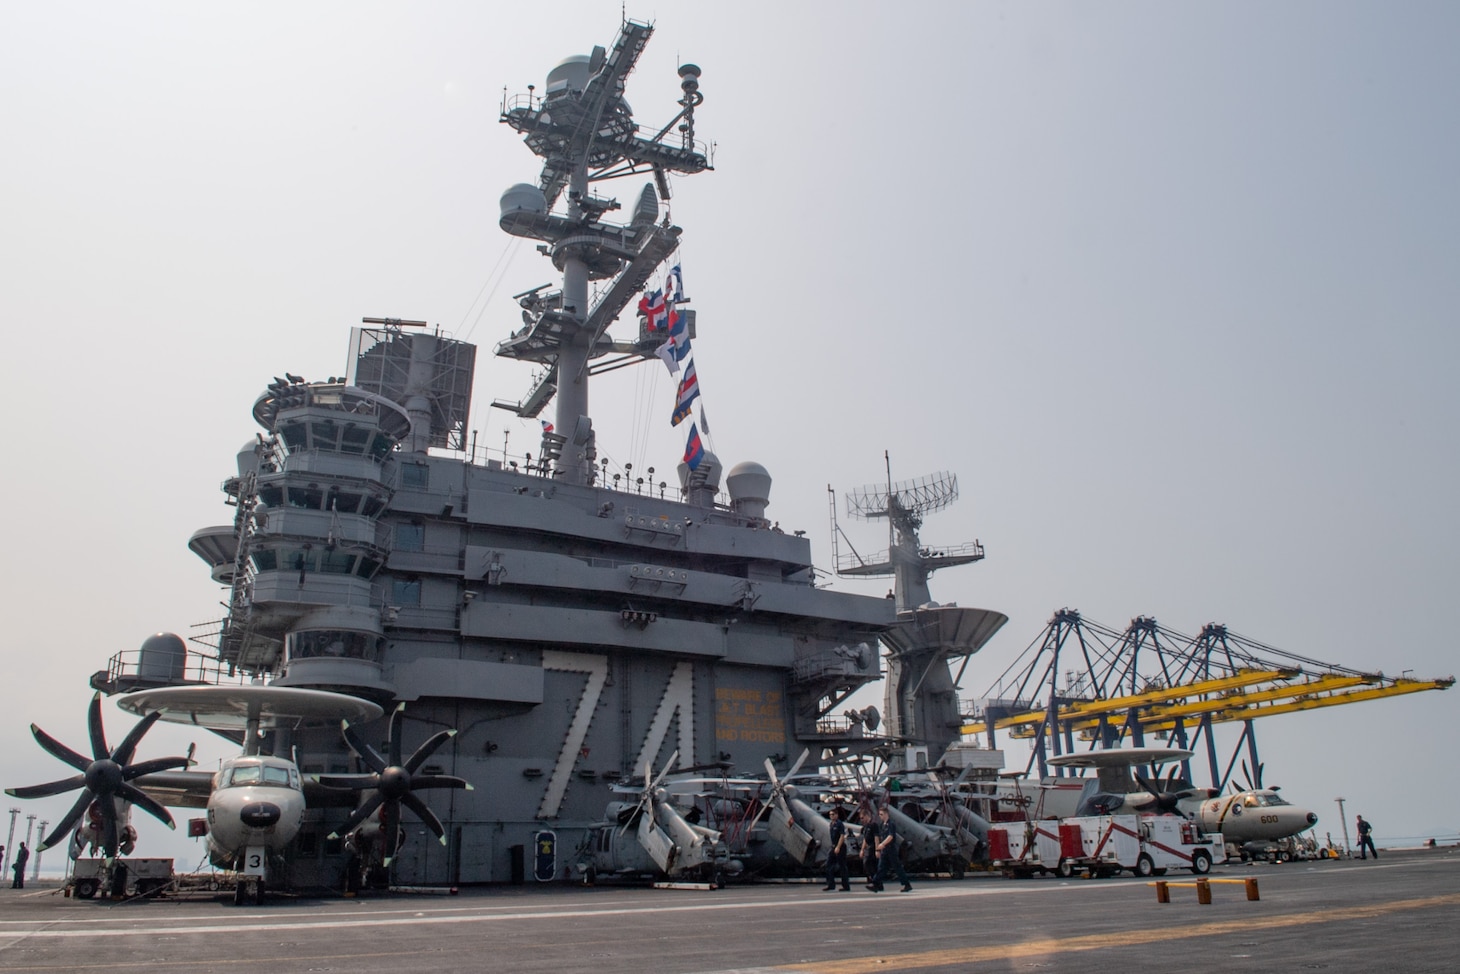 The aircraft carrier USS John C. Stennis (CVN 74) pulls in to Laem Chabang, Thailand, Feb. 10, 2019. The John C. Stennis is deployed to the U.S. 7th Fleet area of operations in support of security and stability in the Indo-Pacific region. (U.S. Navy photo by Mass Communication Specialist Seaman Jarrod A. Schad)